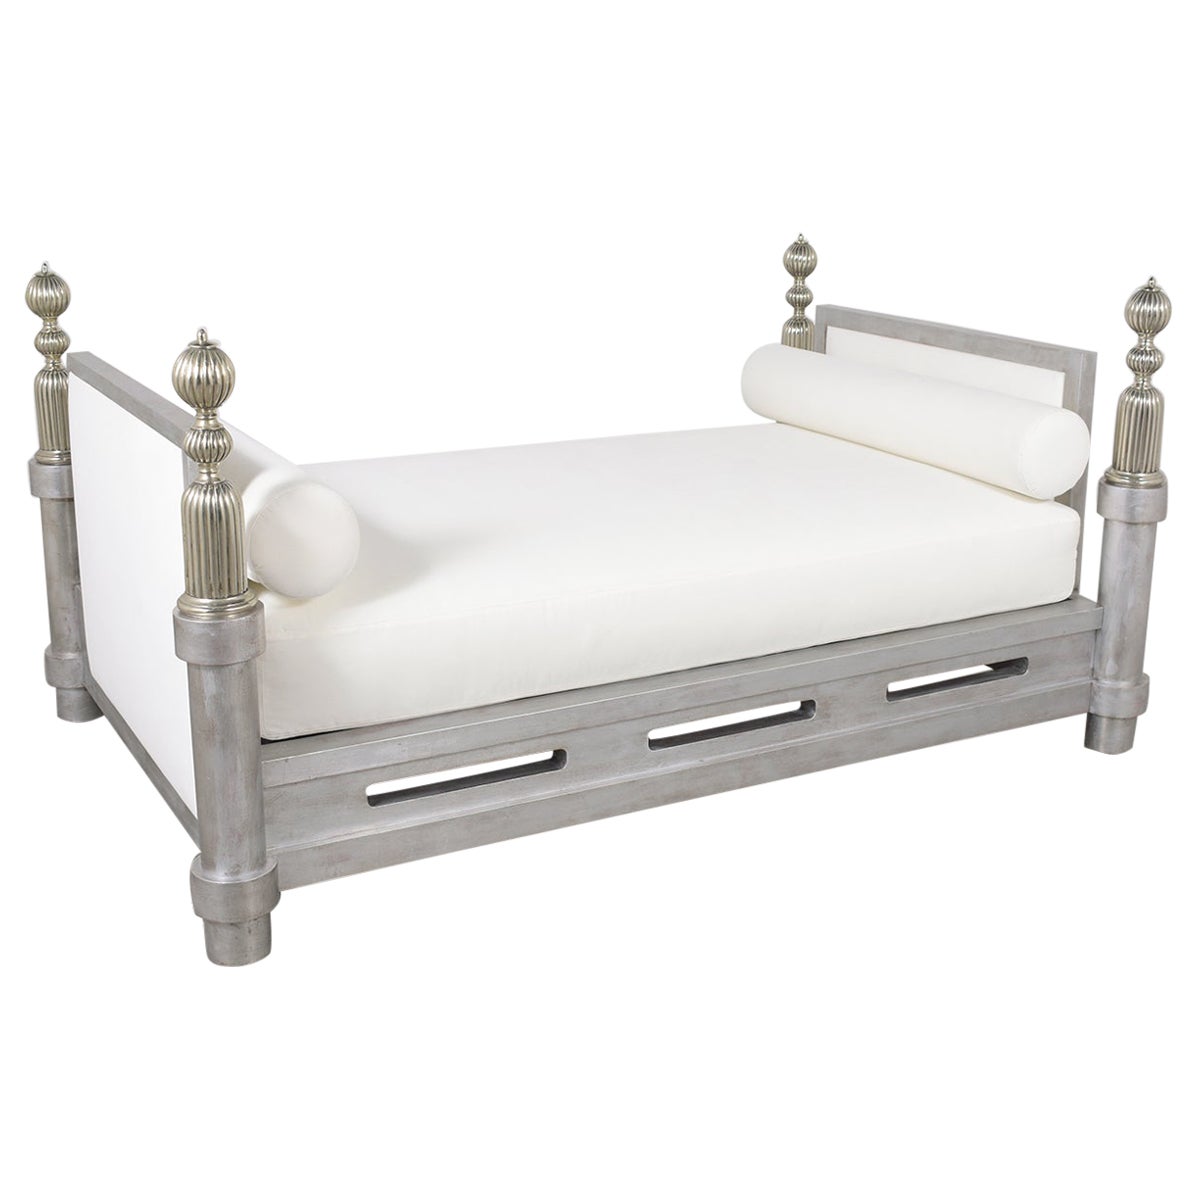 Hand-Crafted Regency-Style Daybed: Vintage Elegance & Contemporary Aesthetics For Sale